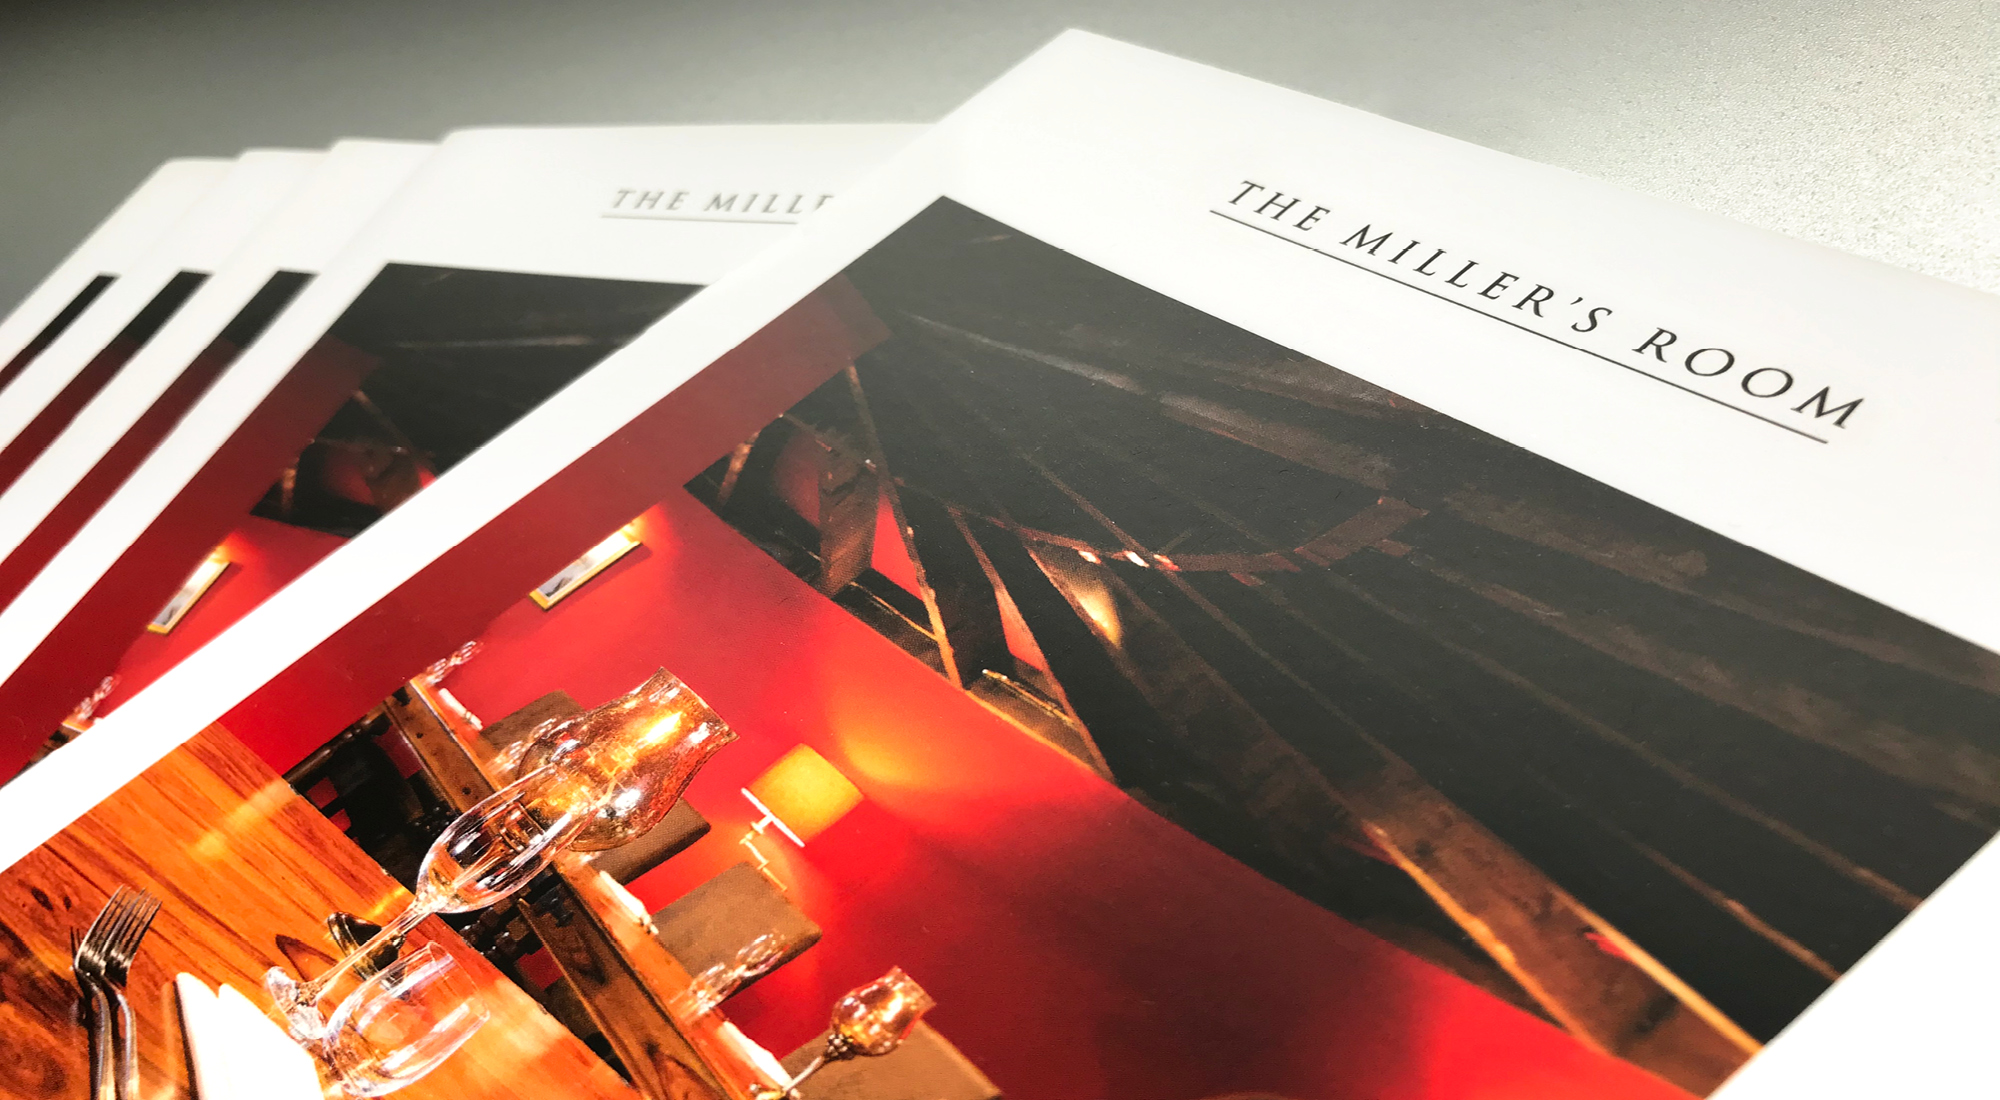 The Windmill Chatham Green Millers Room luxury fine dining Essex Pub